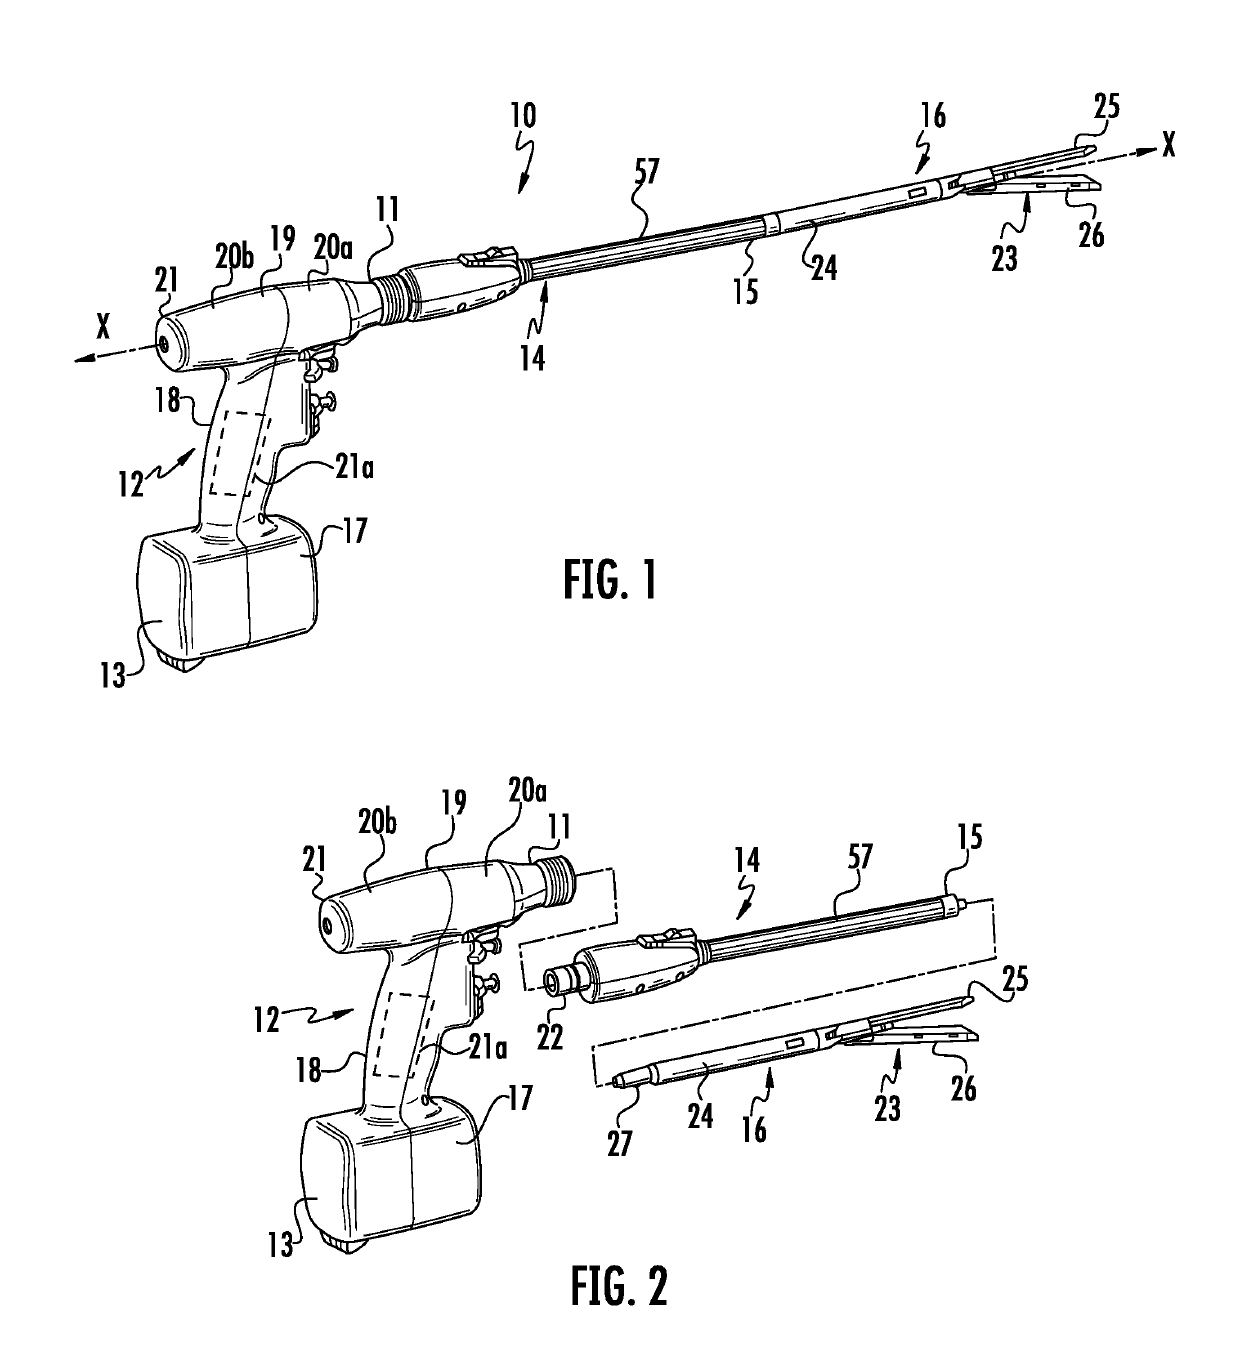 Authentication and information system for reusable surgical instruments